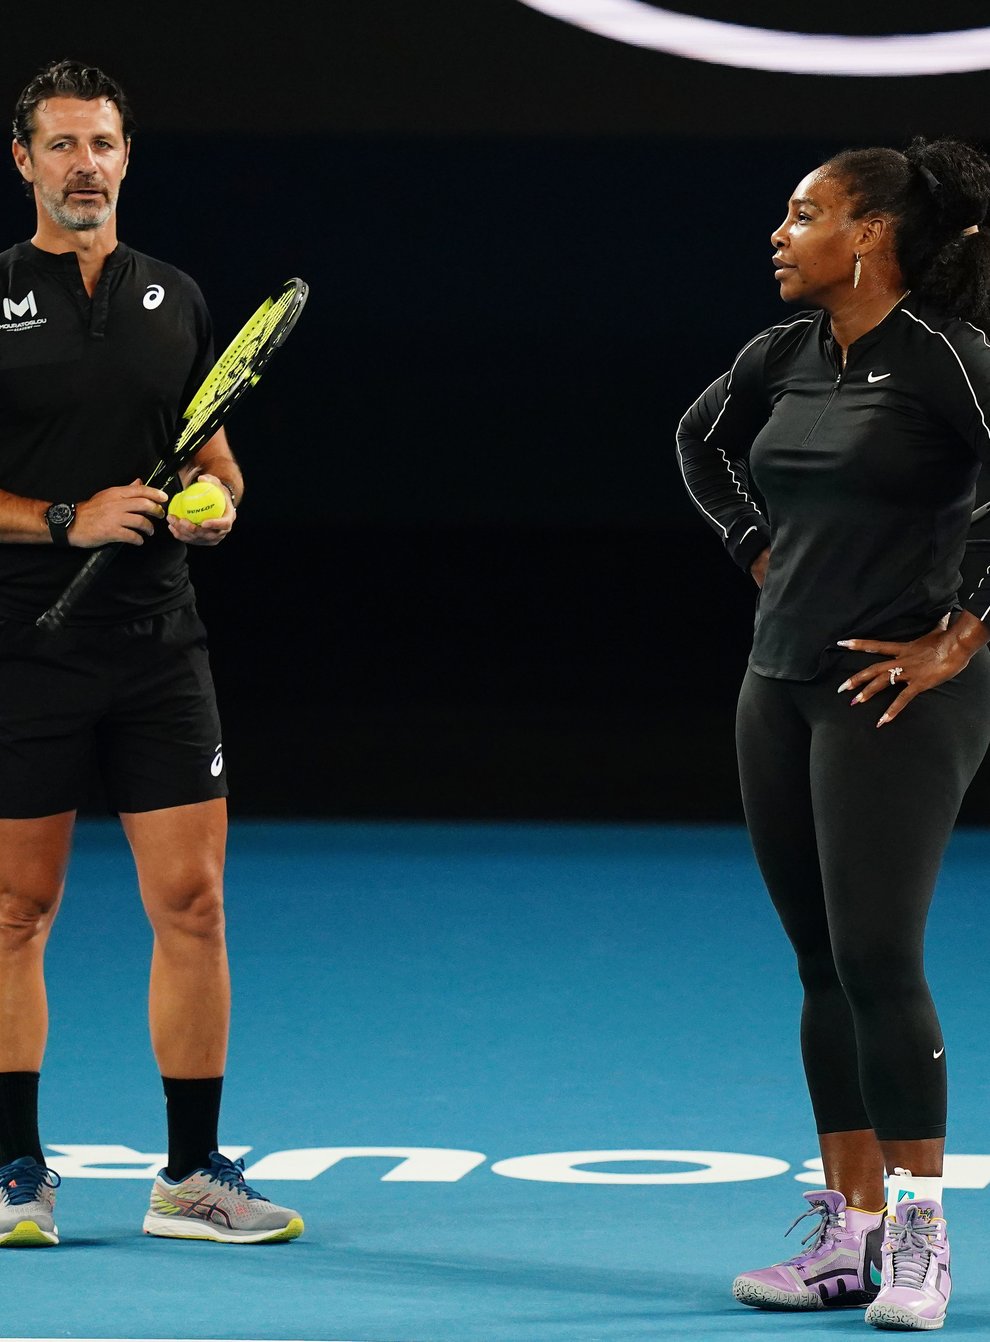 Serena Williams and Patrick Mouratoglou were famously in trouble after her outburst in the 2018 US Open final (PA Images)